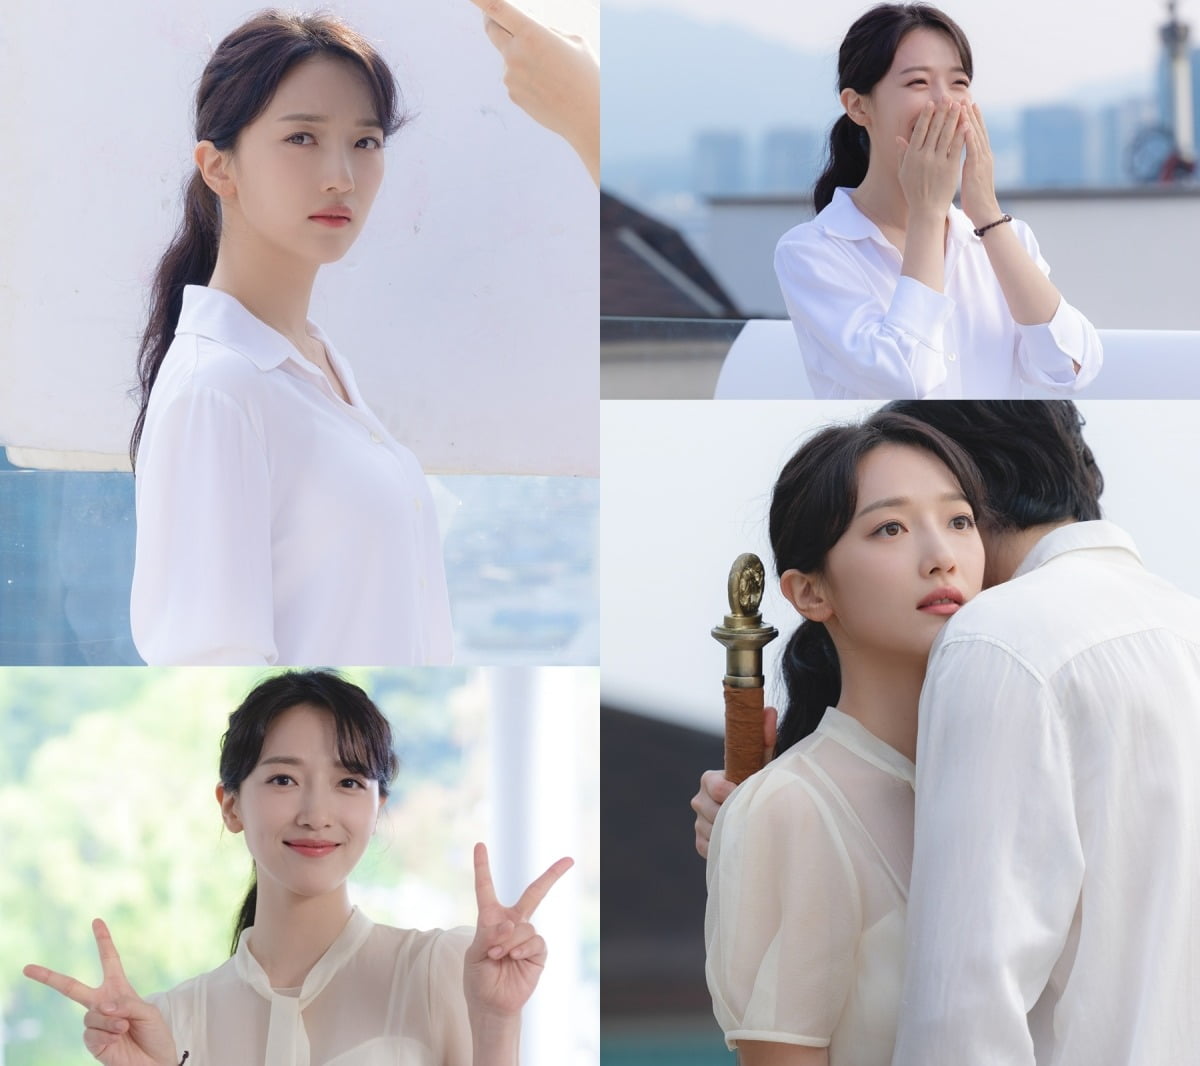 Actress Pyo Ye-jin, smile that makes people's hearts flutter